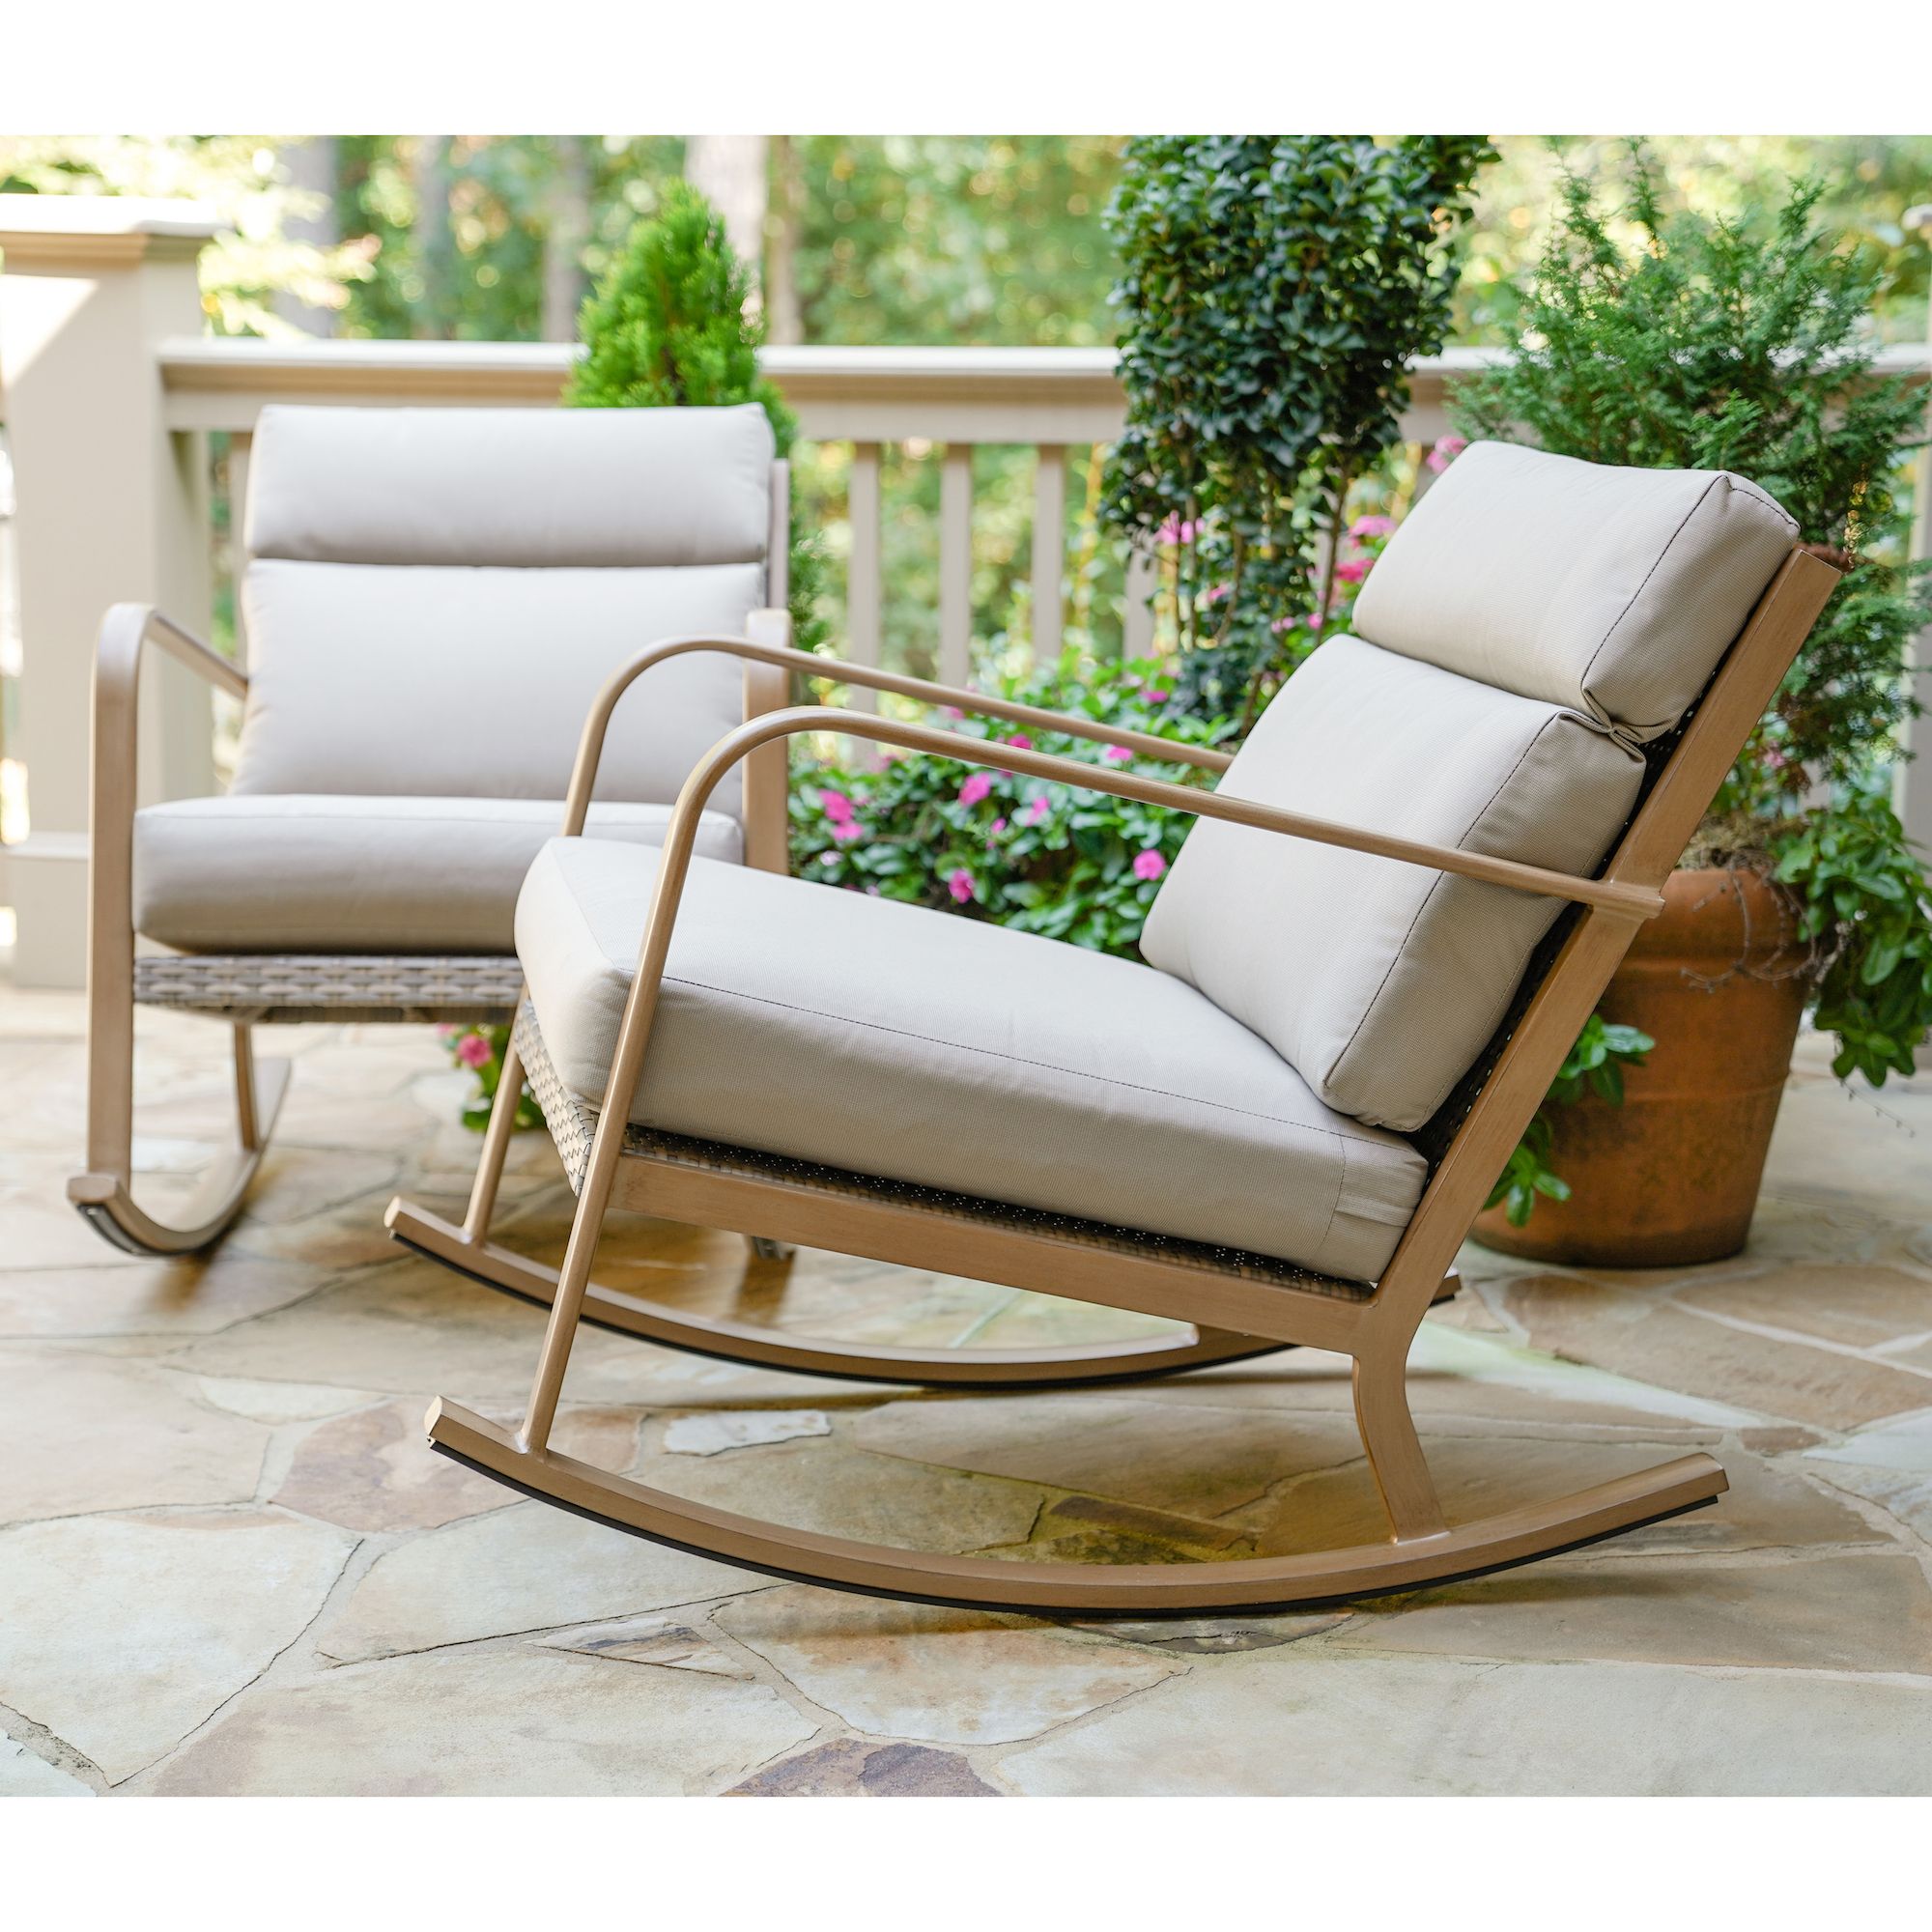 Comfortable Rocking Chairs For Nurseries And Gardens